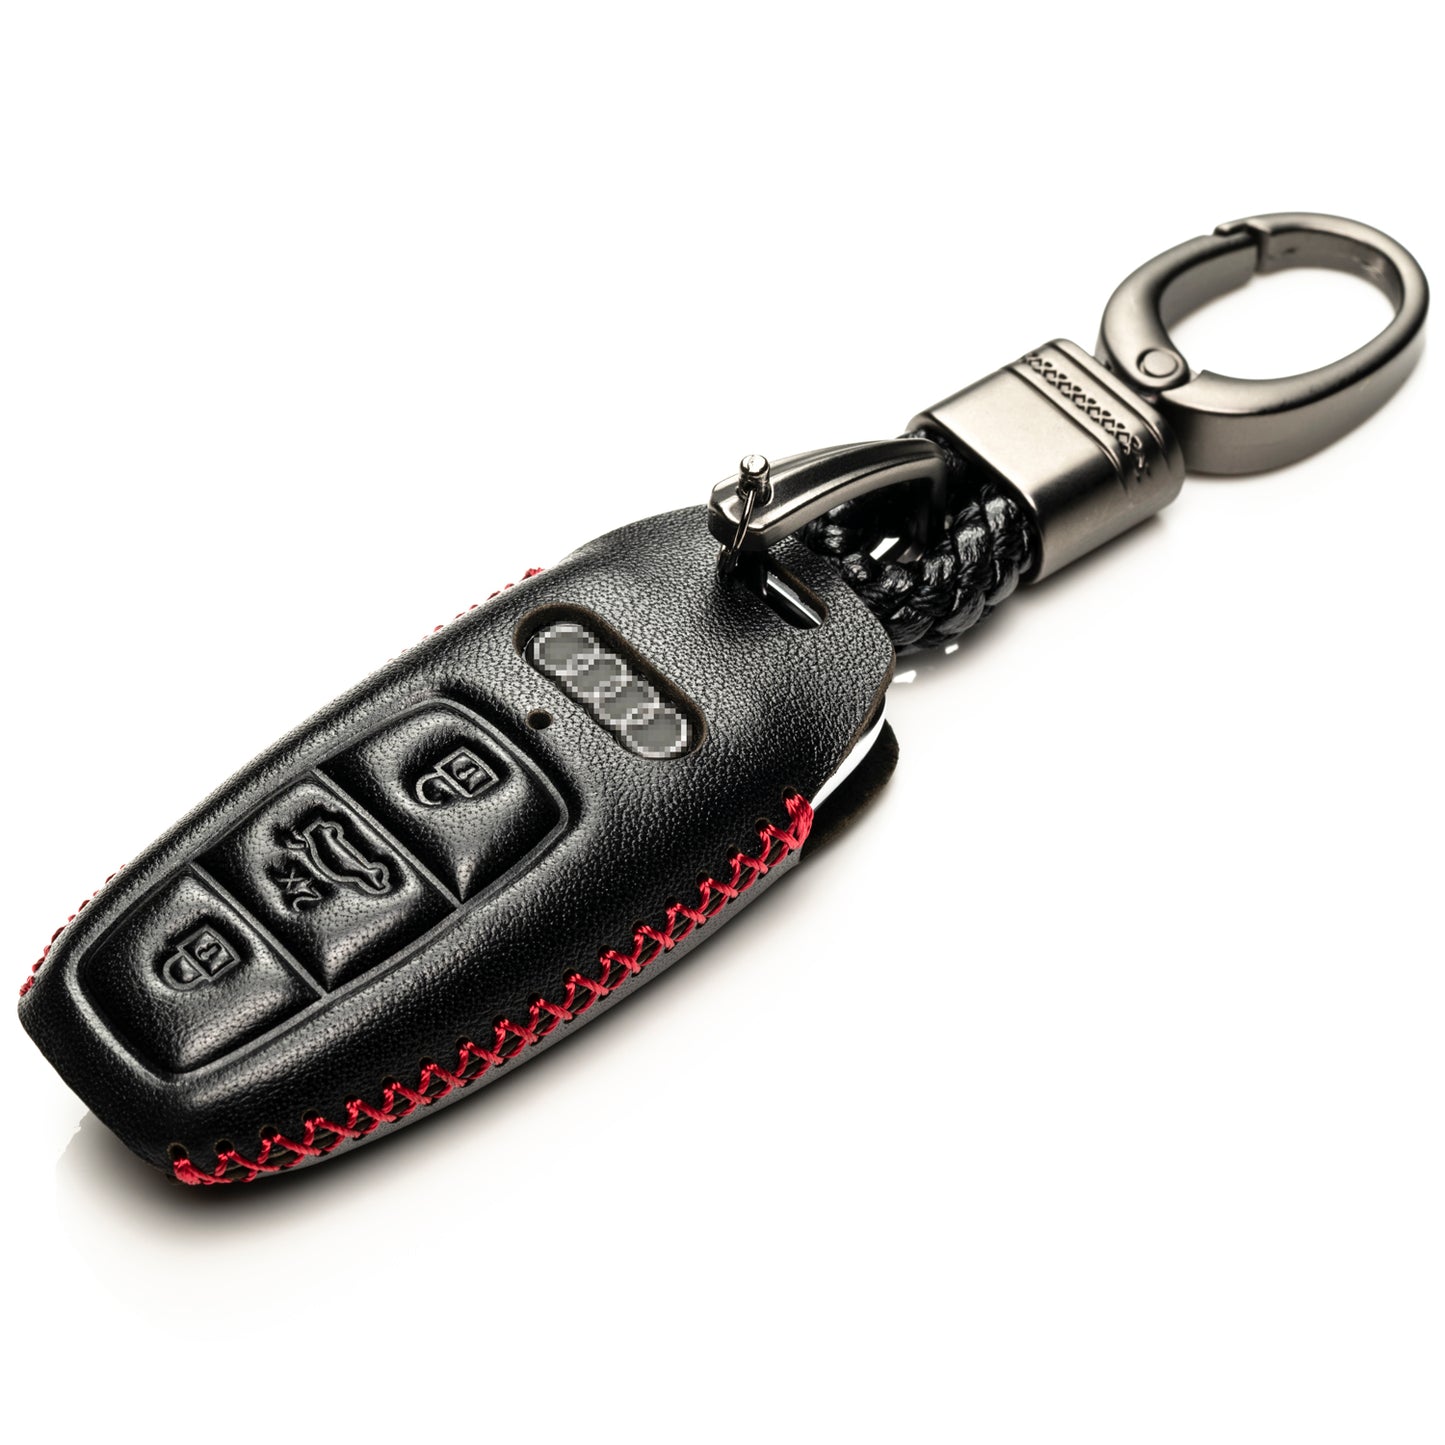 Vitodeco 4-Button Leather Smart Key Fob Case Compatible with Audi Q7, Q8, SQ7, SQ8, A7, A8, A5, A6, S7, S5, S6, S8 2019-2024